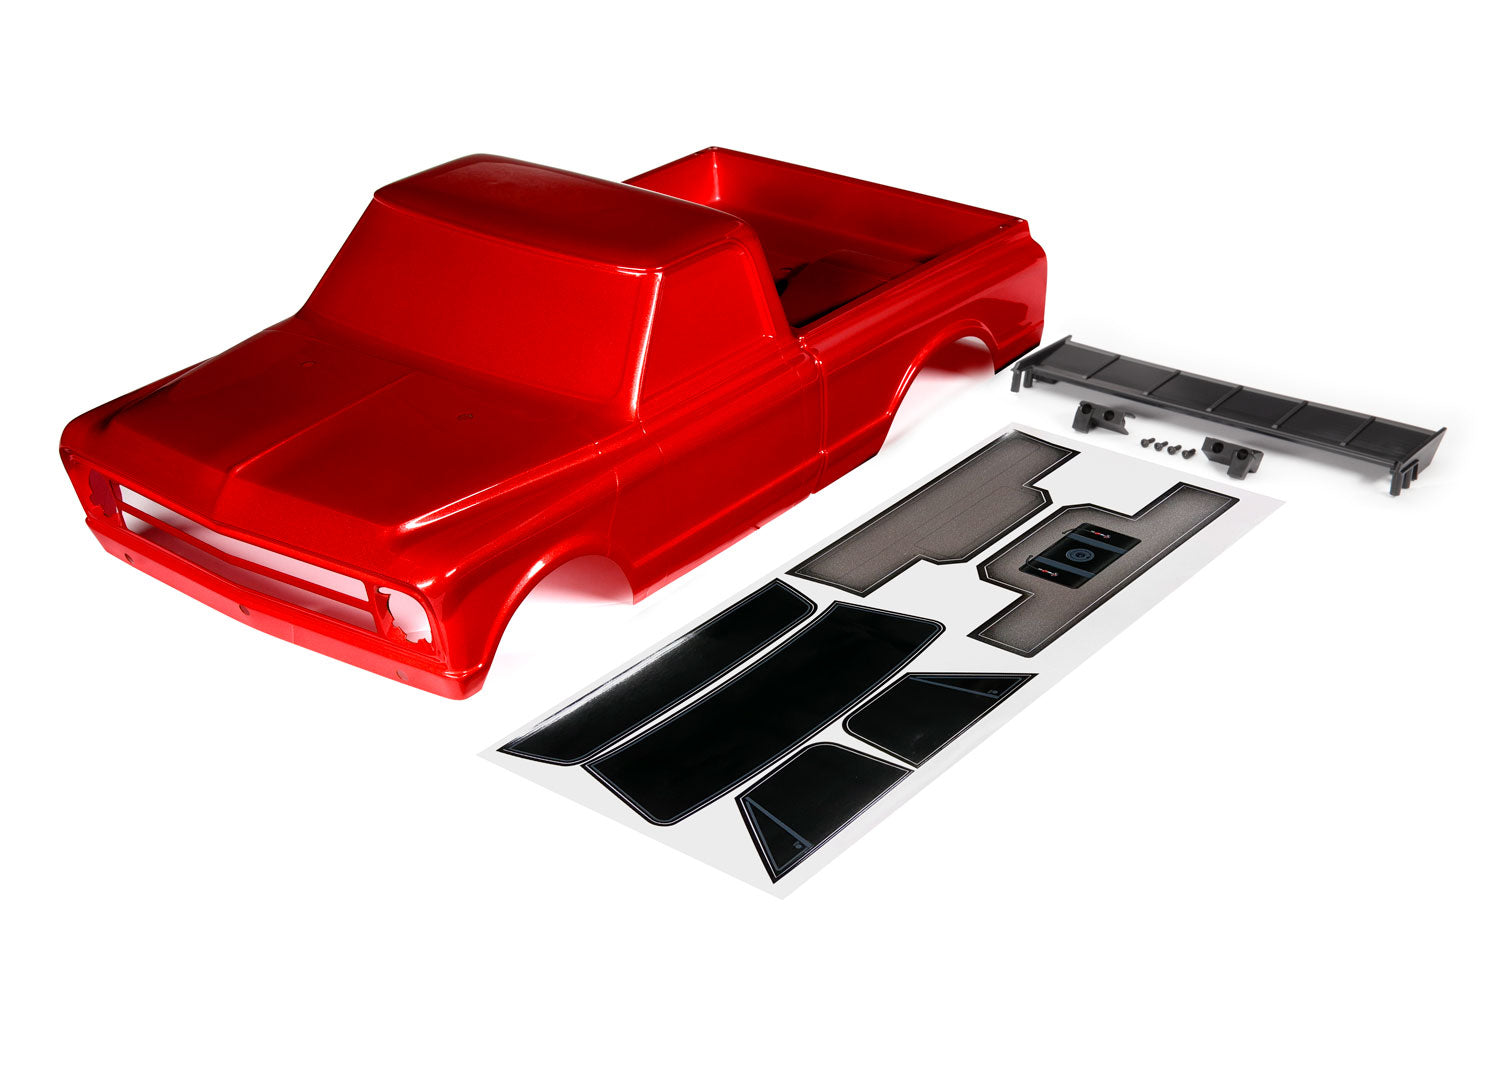 TRAXXAS 9411R Body, Chevrolet C10 (red) (includes wing & decals) (requires #9415 series body accessories to complete body)